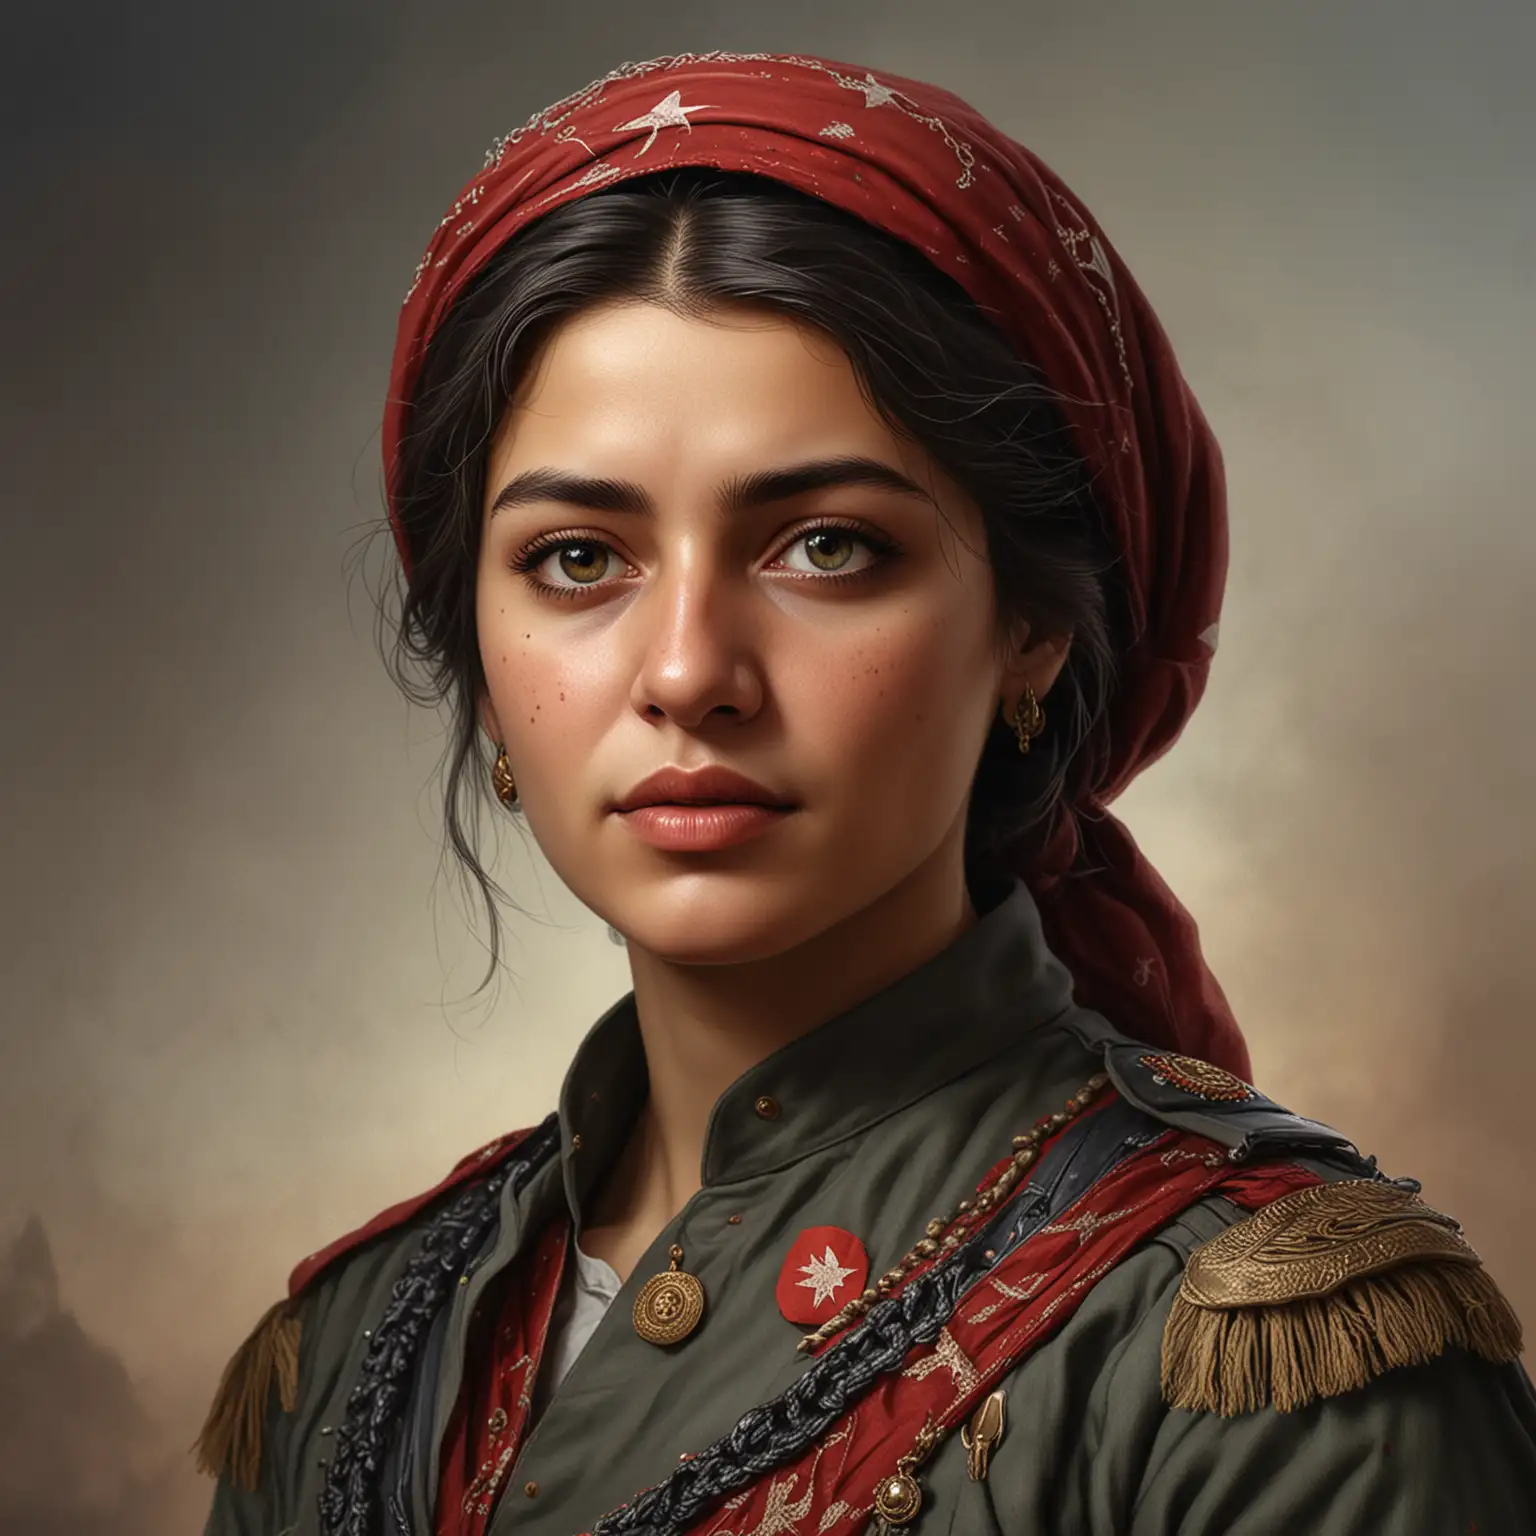 Kara-Fatma-Realistic-Portrait-of-a-Heroine-from-the-Turkish-War-of-Independence